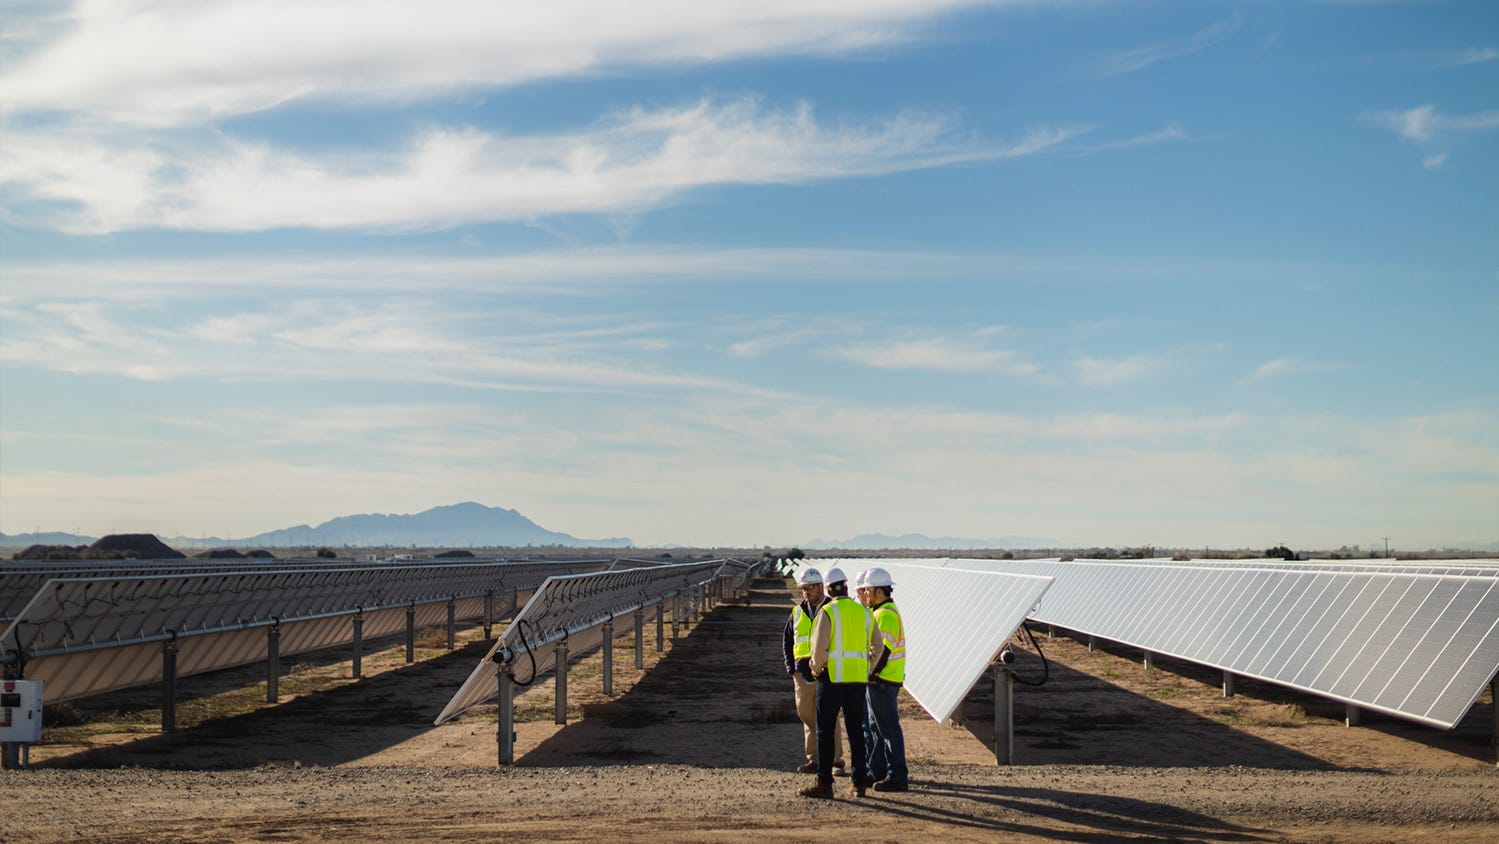 Apple, Pepsi, Target and others to get solar energy through deal with Salt River Project